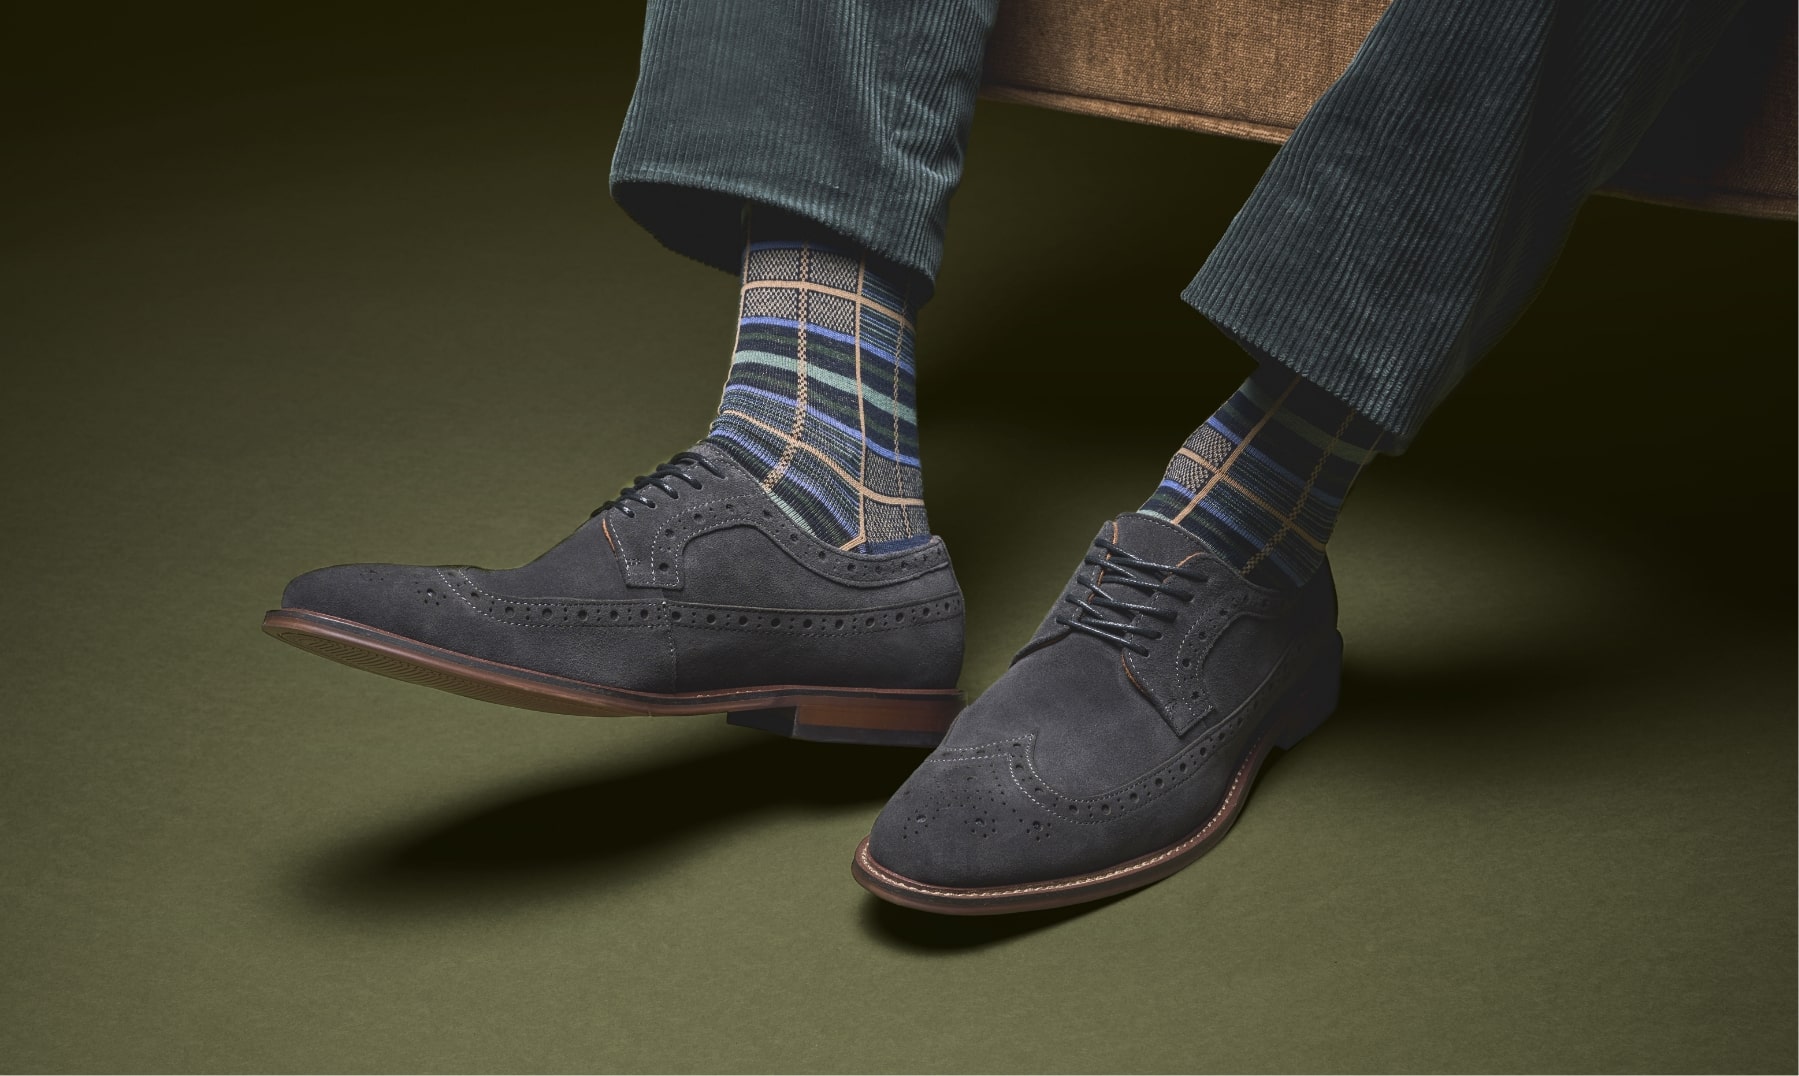 Click to shop Stacy Adams casuals. Image features the Marligan wingtip.